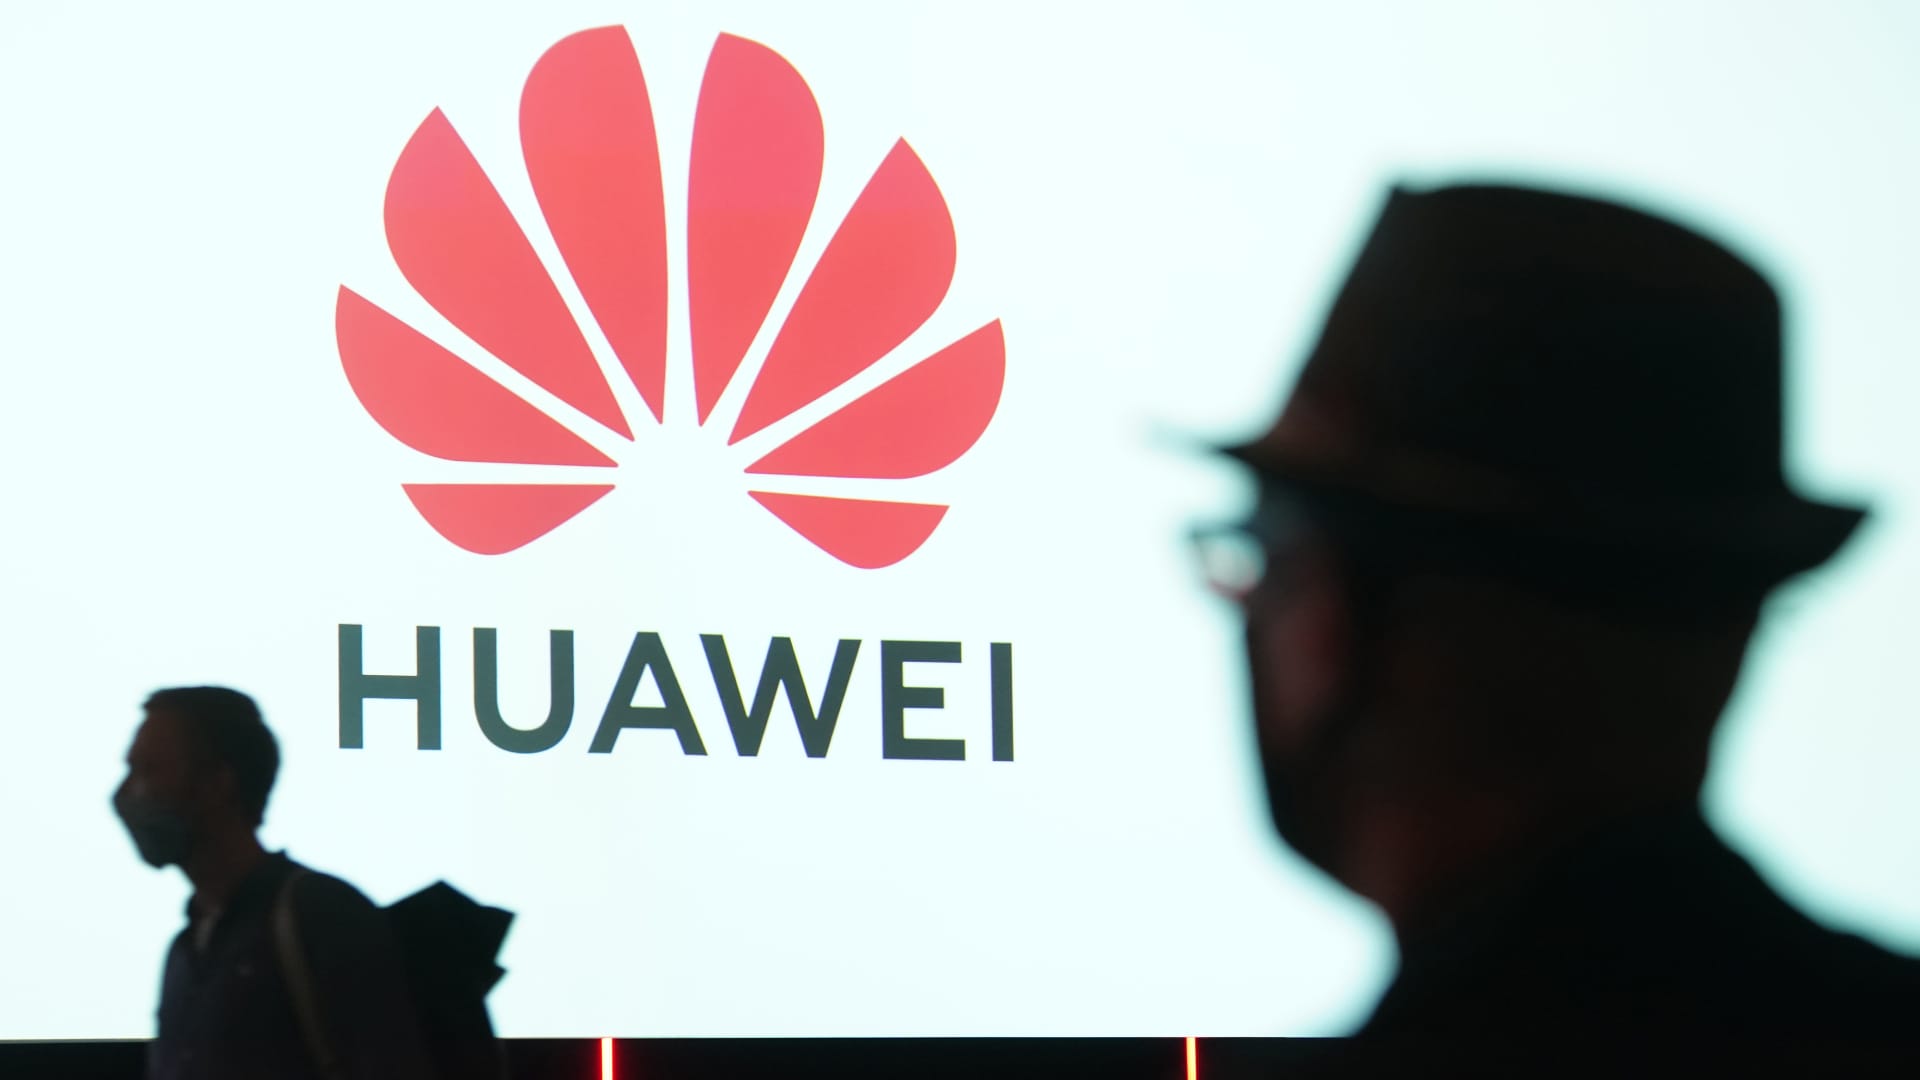 U.S. revokes some export licenses to promote chips to Huawei in a bid to control China’s tech energy